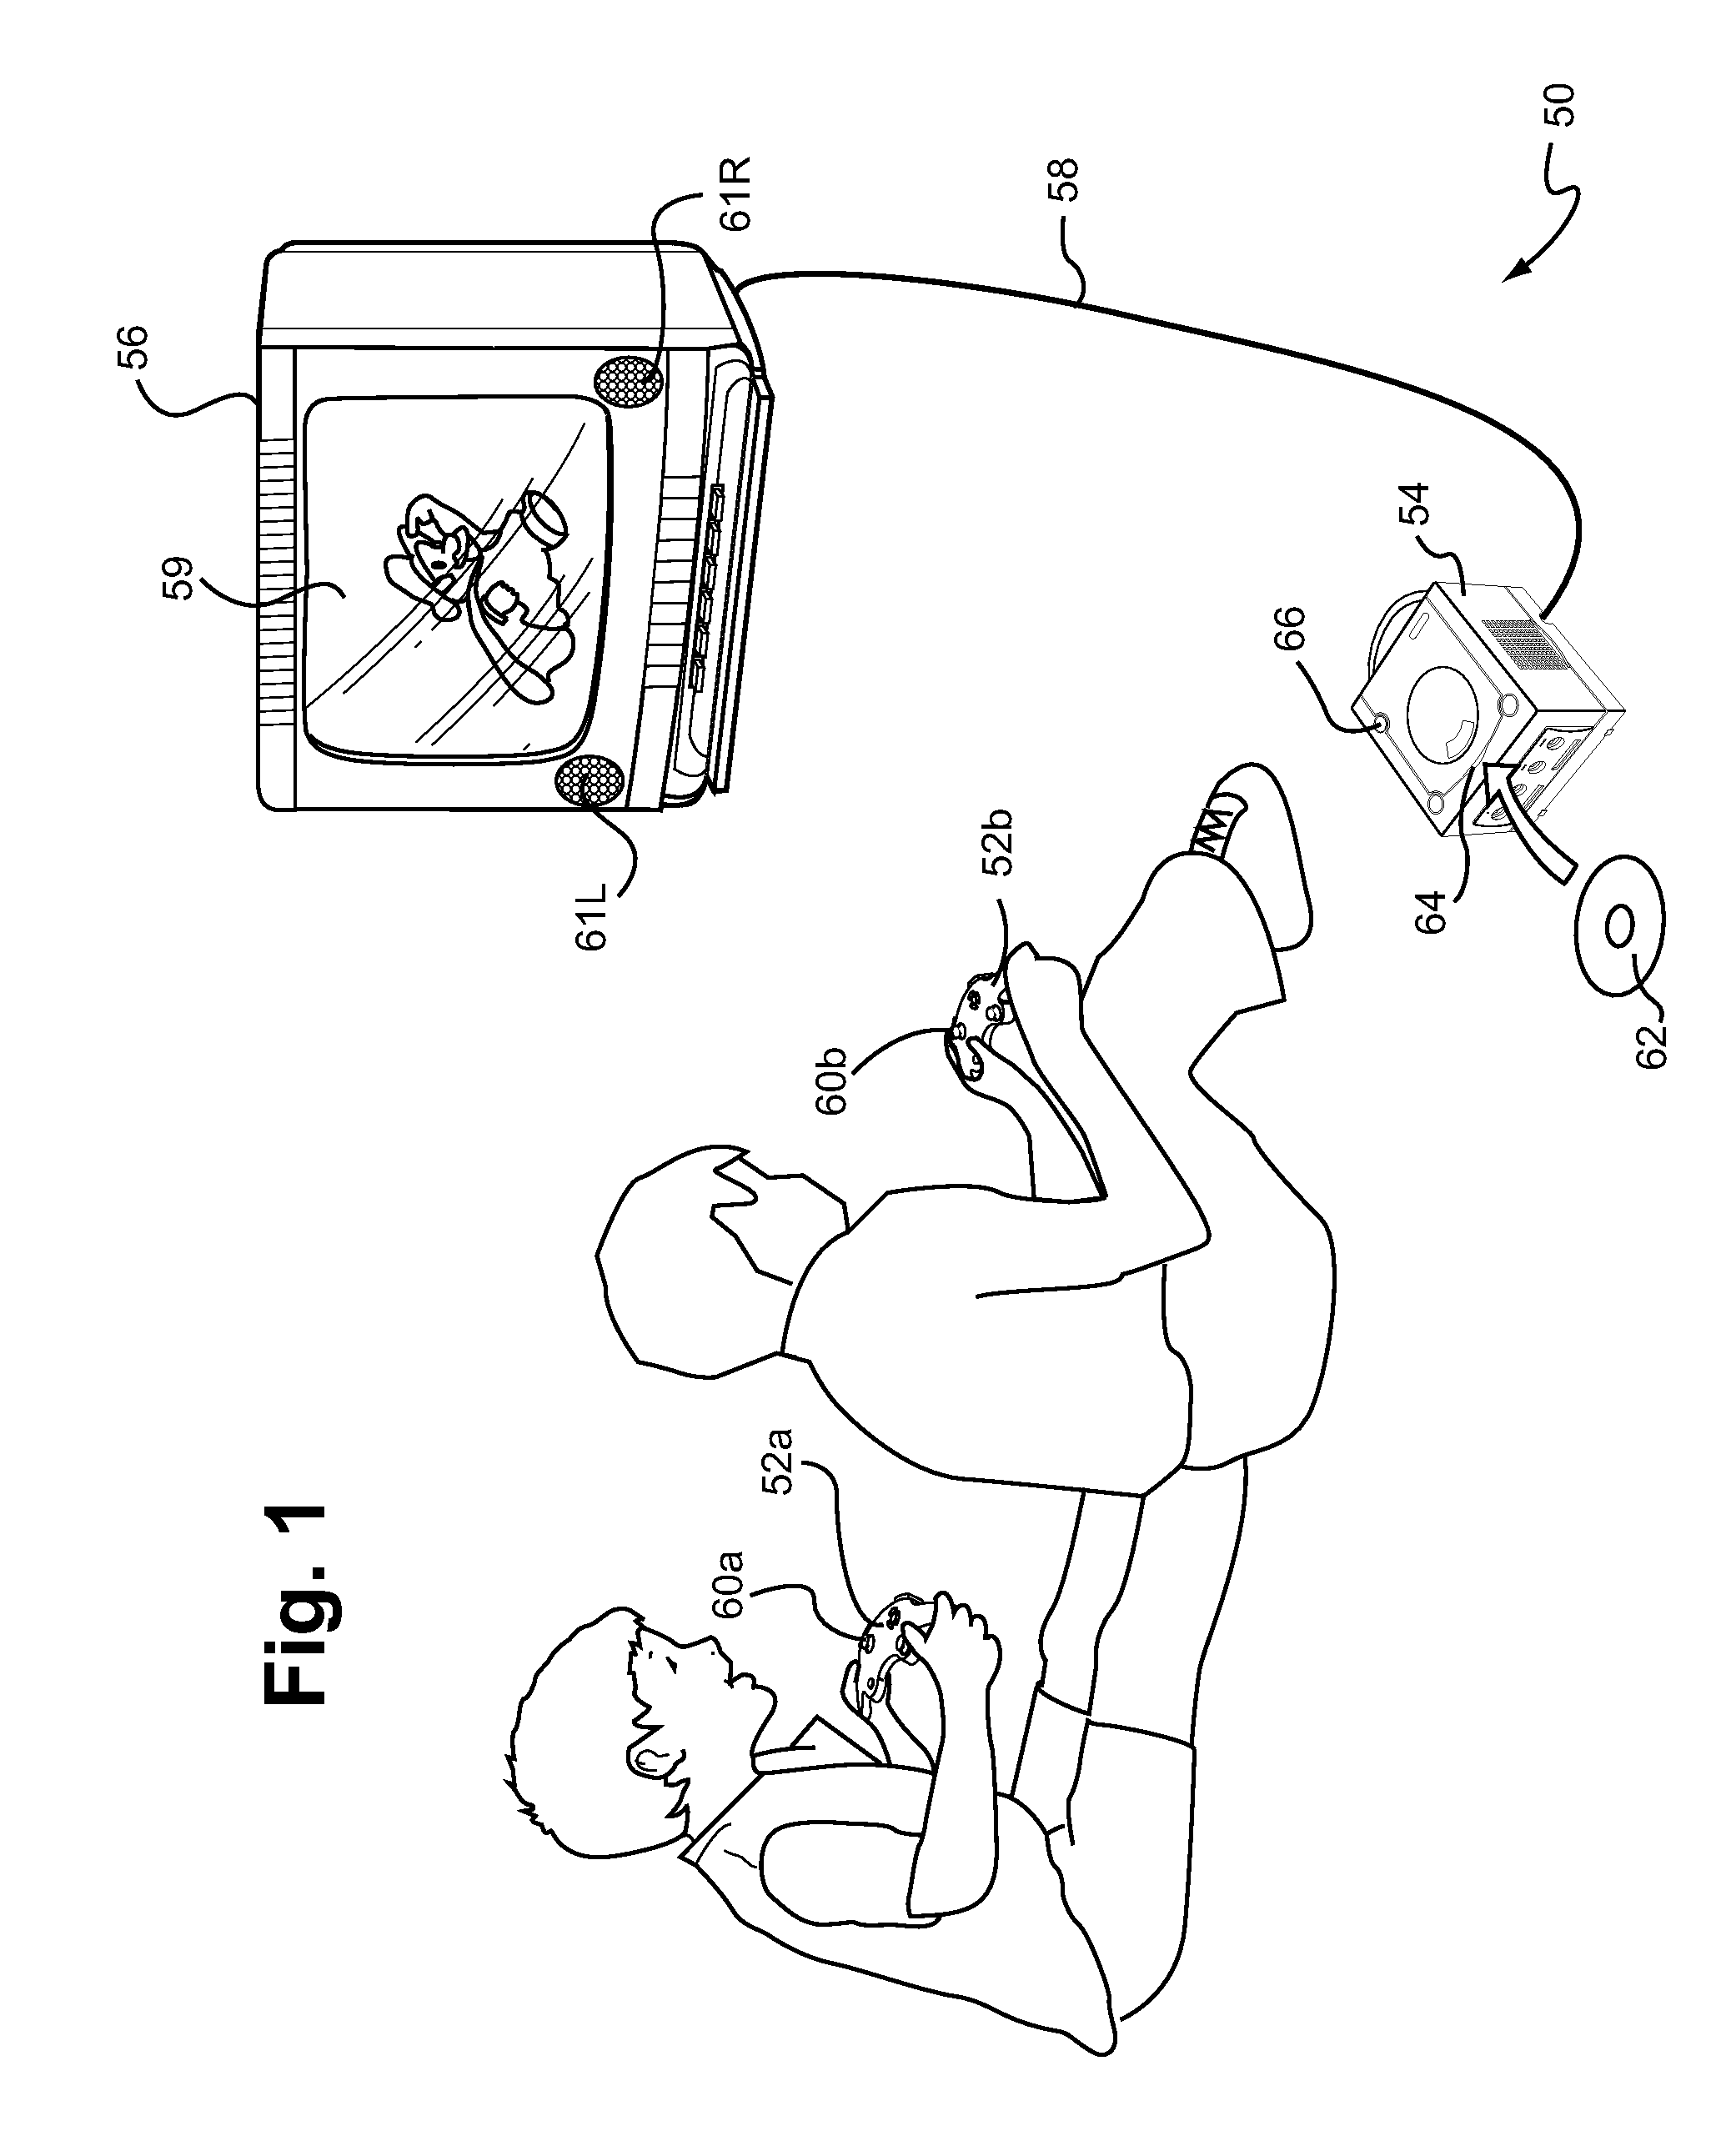 System and method for efficiently simulating and imaging realistic water surface and other effects